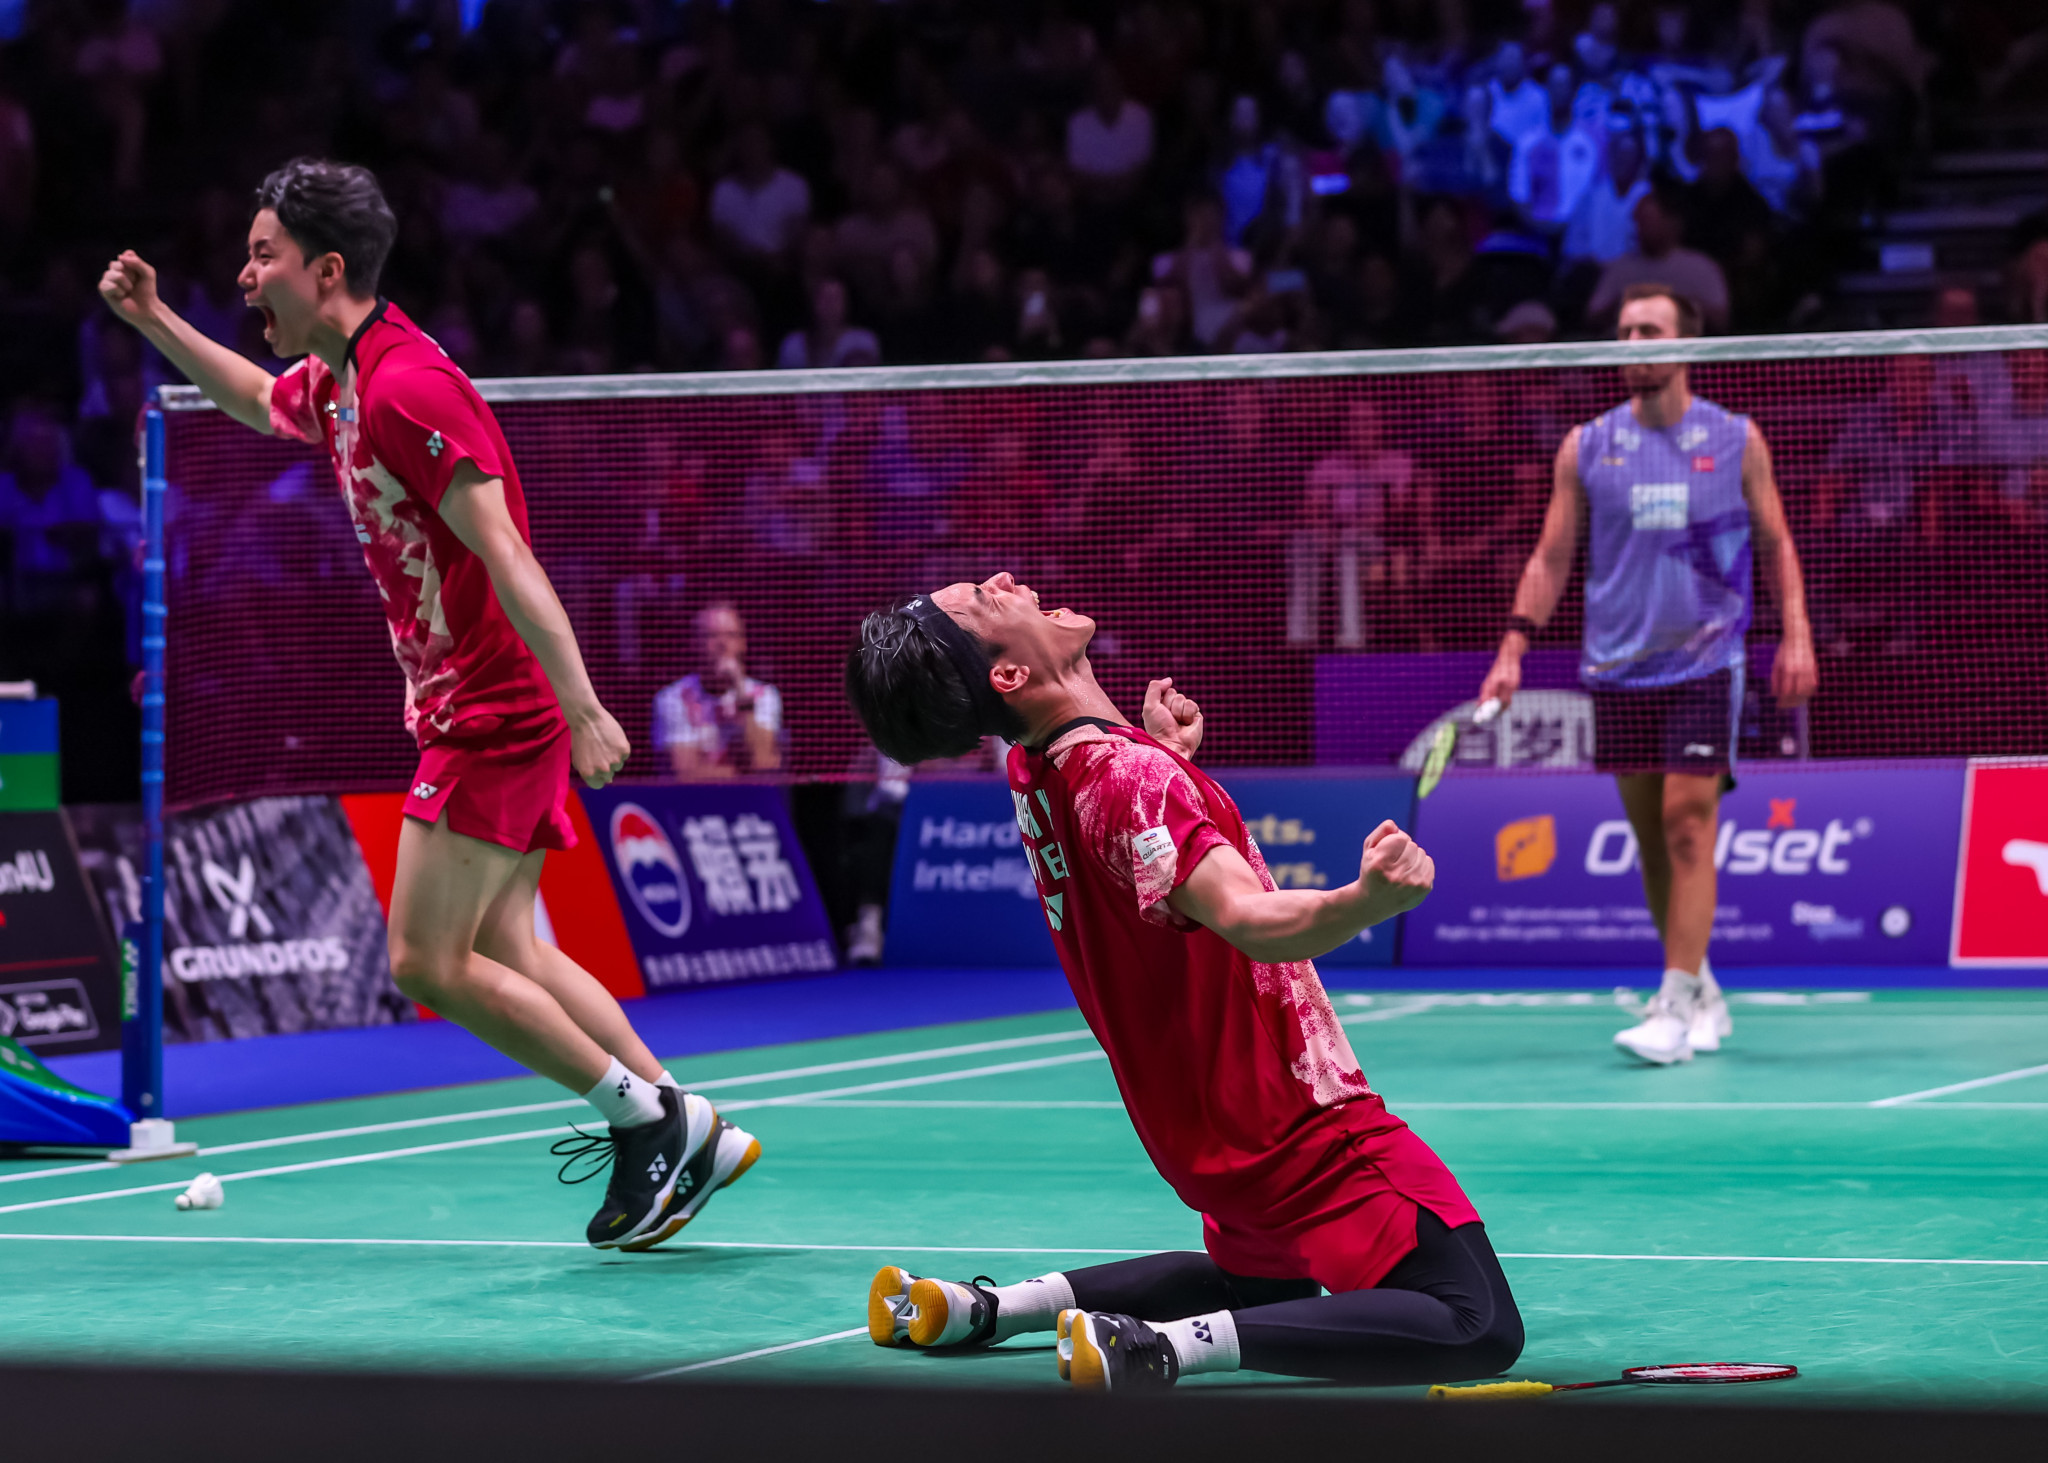 South Korean duo spoil Danish party as Seo wins golden double at Badminton World Championships